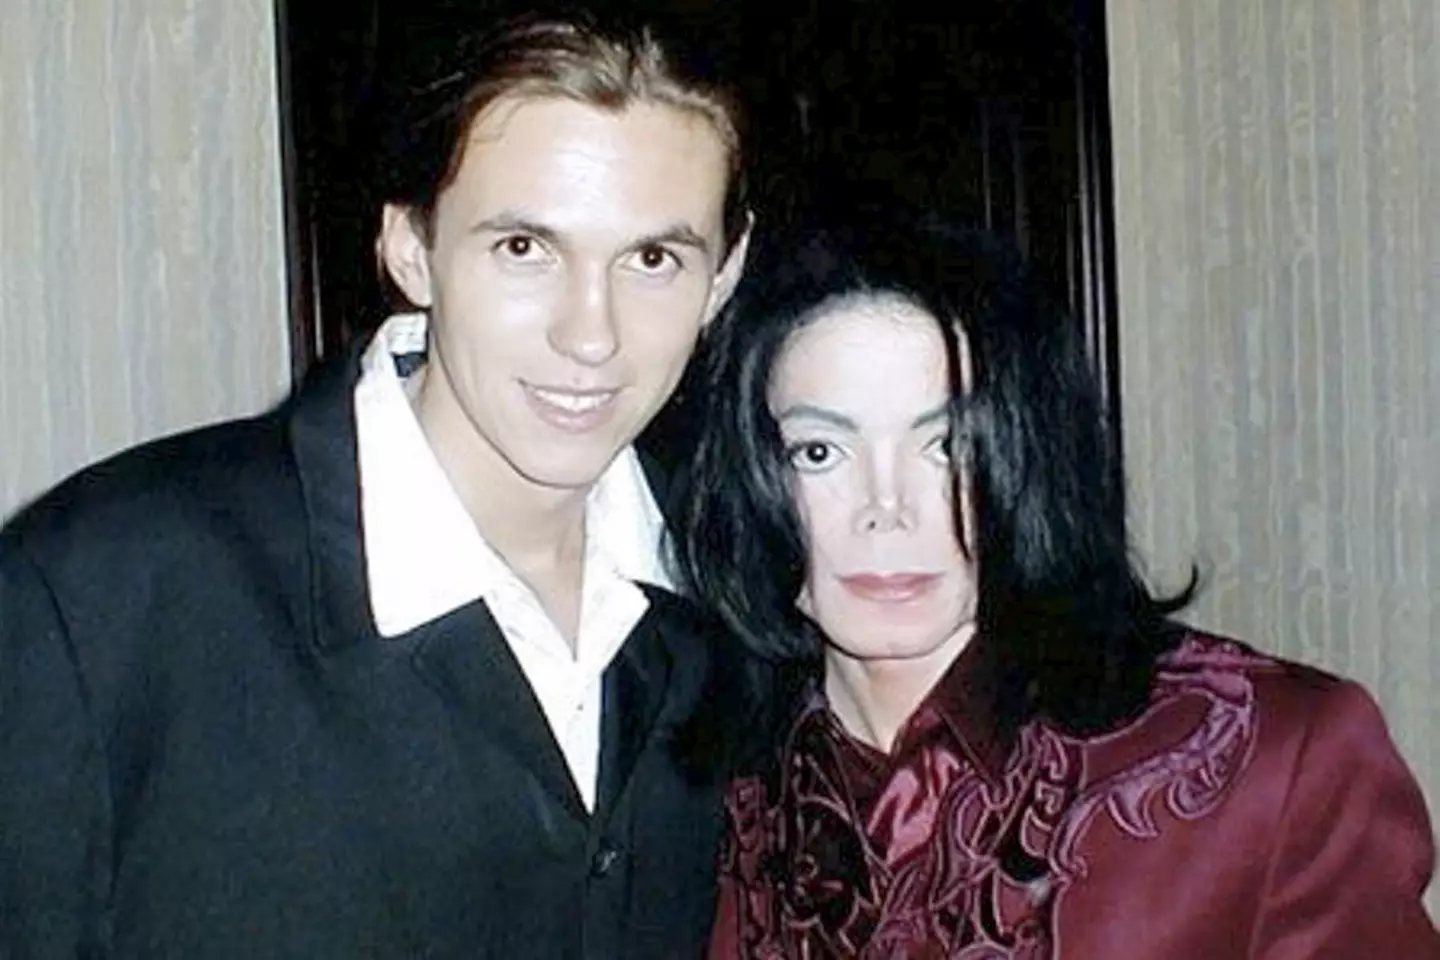 The 43-year-old was Michael Jackson's former bodyguard.